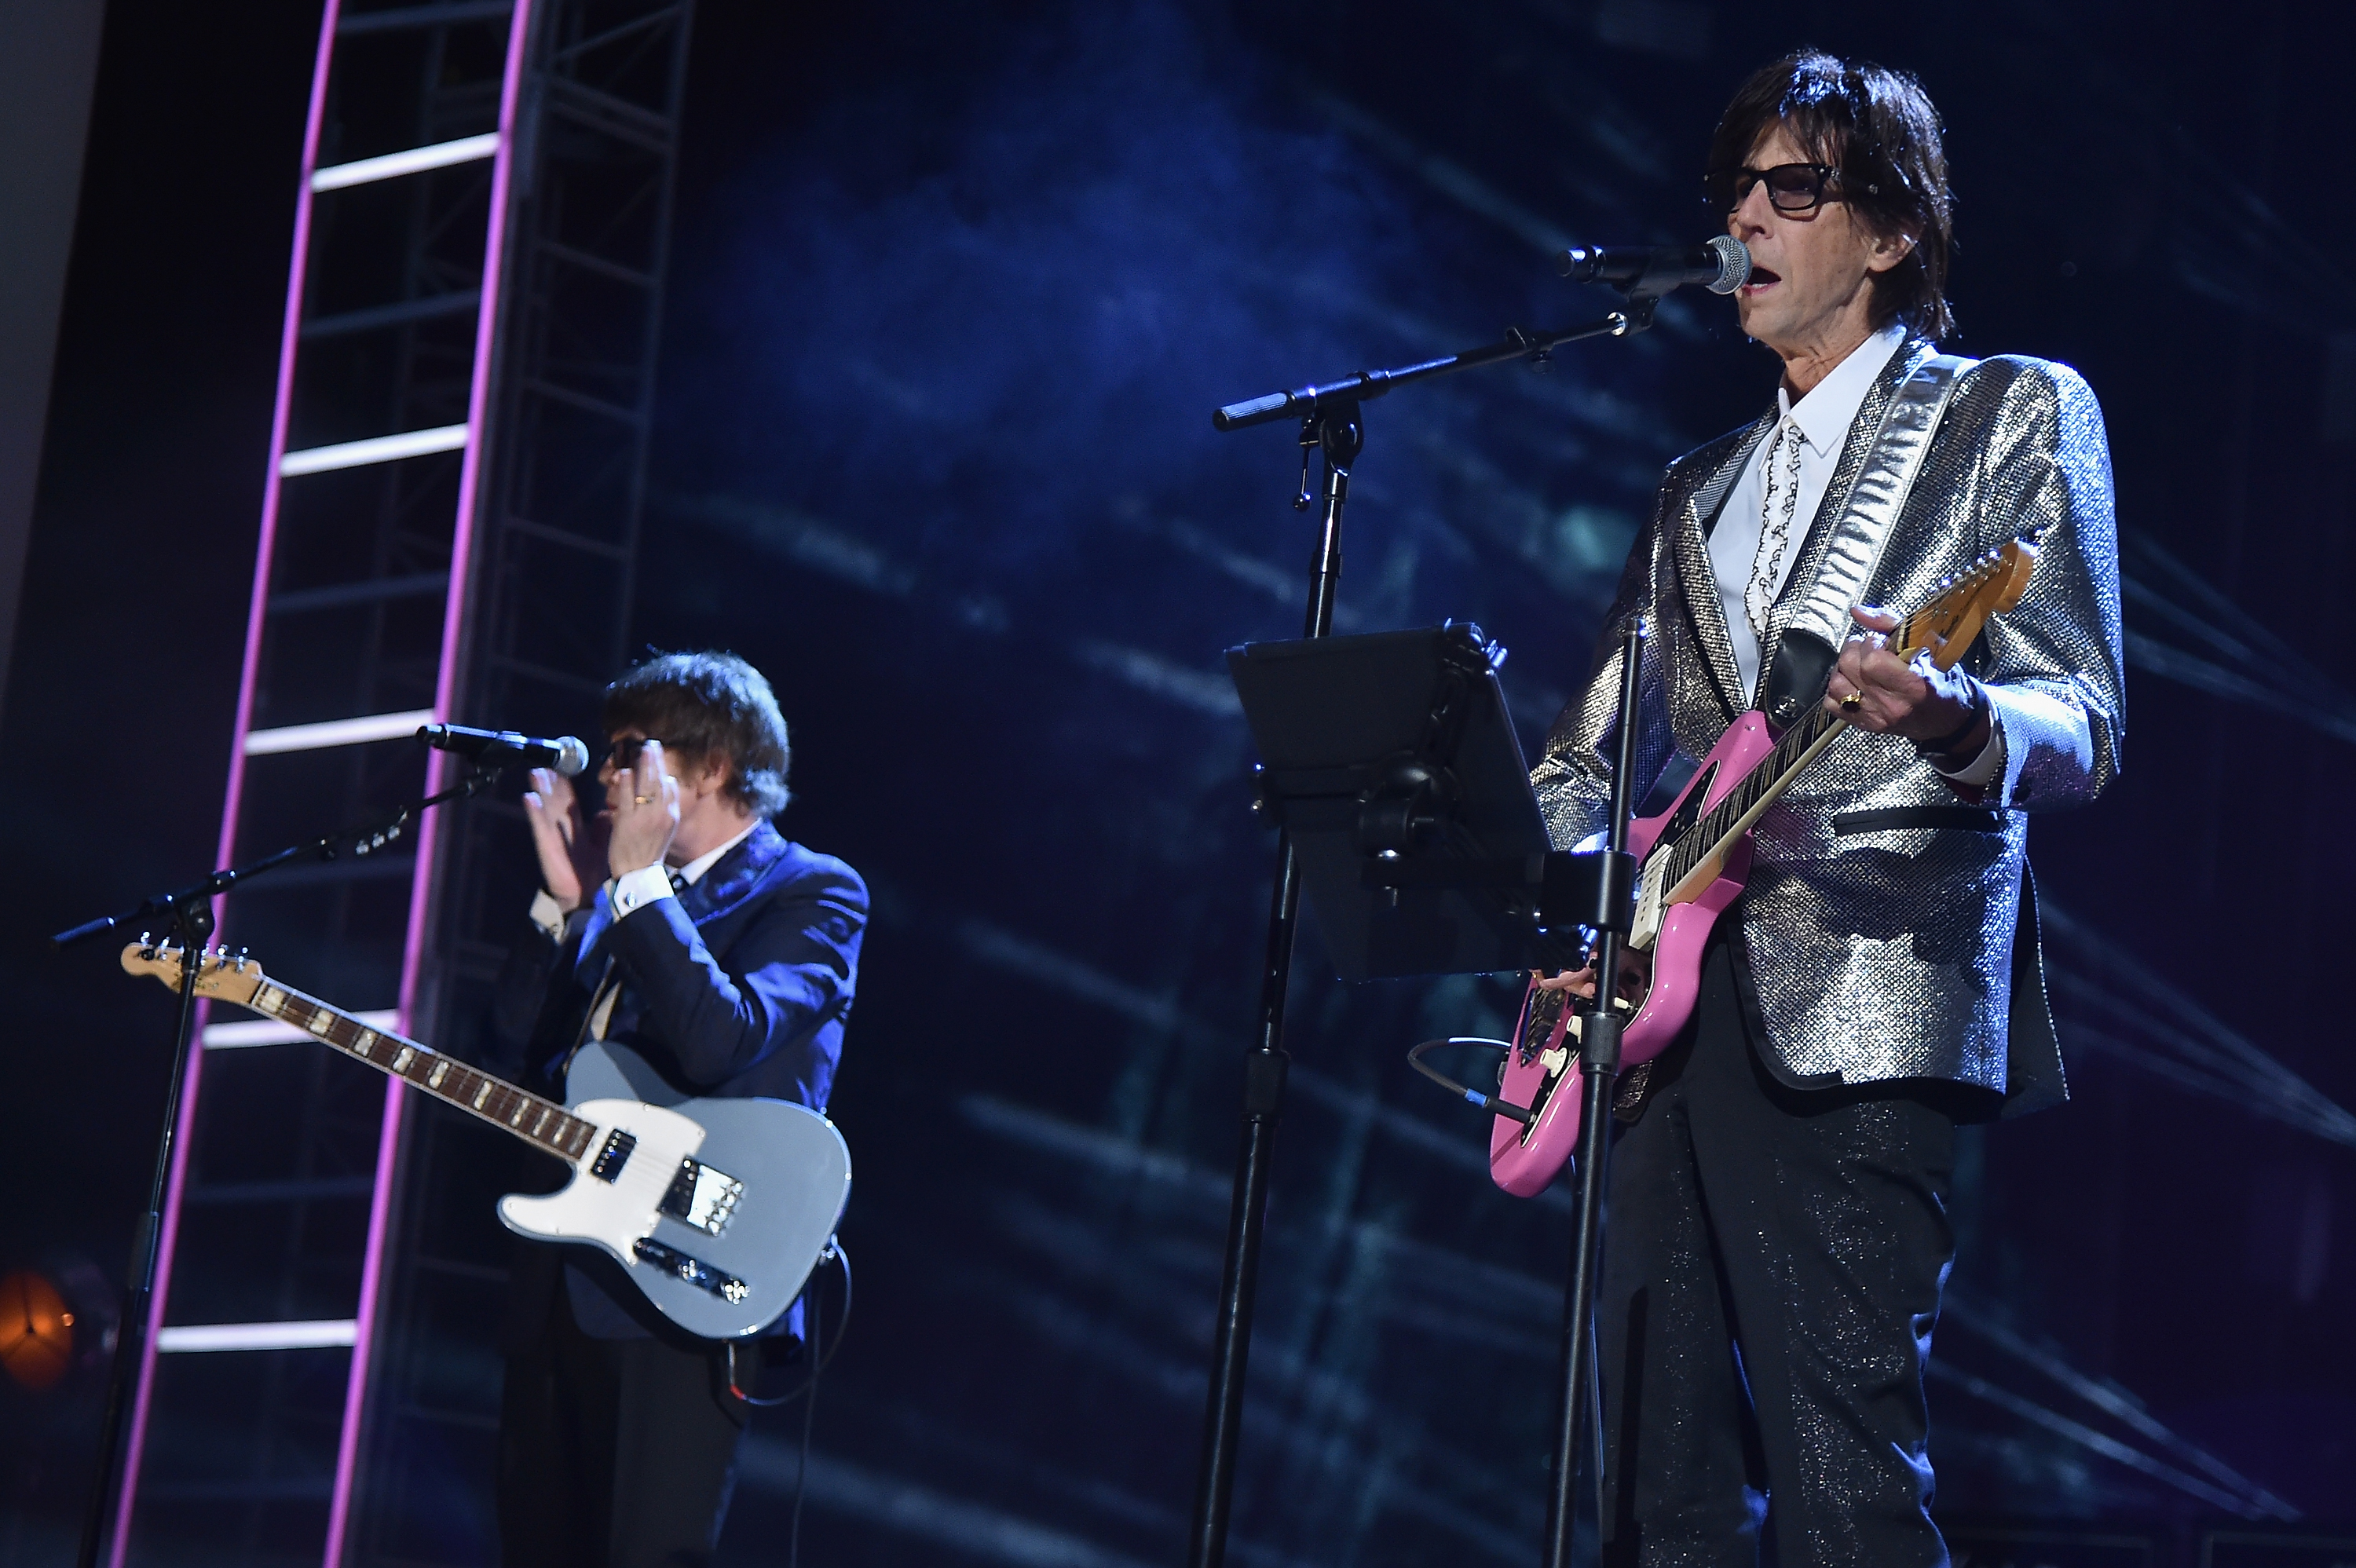 Ric Ocasek of the Cars performs during the 33rd Annual Rock & Roll Hall of Fame Induction Ceremony at Public Auditorium on April 14, 2018 in Cleveland, Ohio. (Photo by Theo Wargo/Getty Images For The Rock and Roll Hall of Fame)